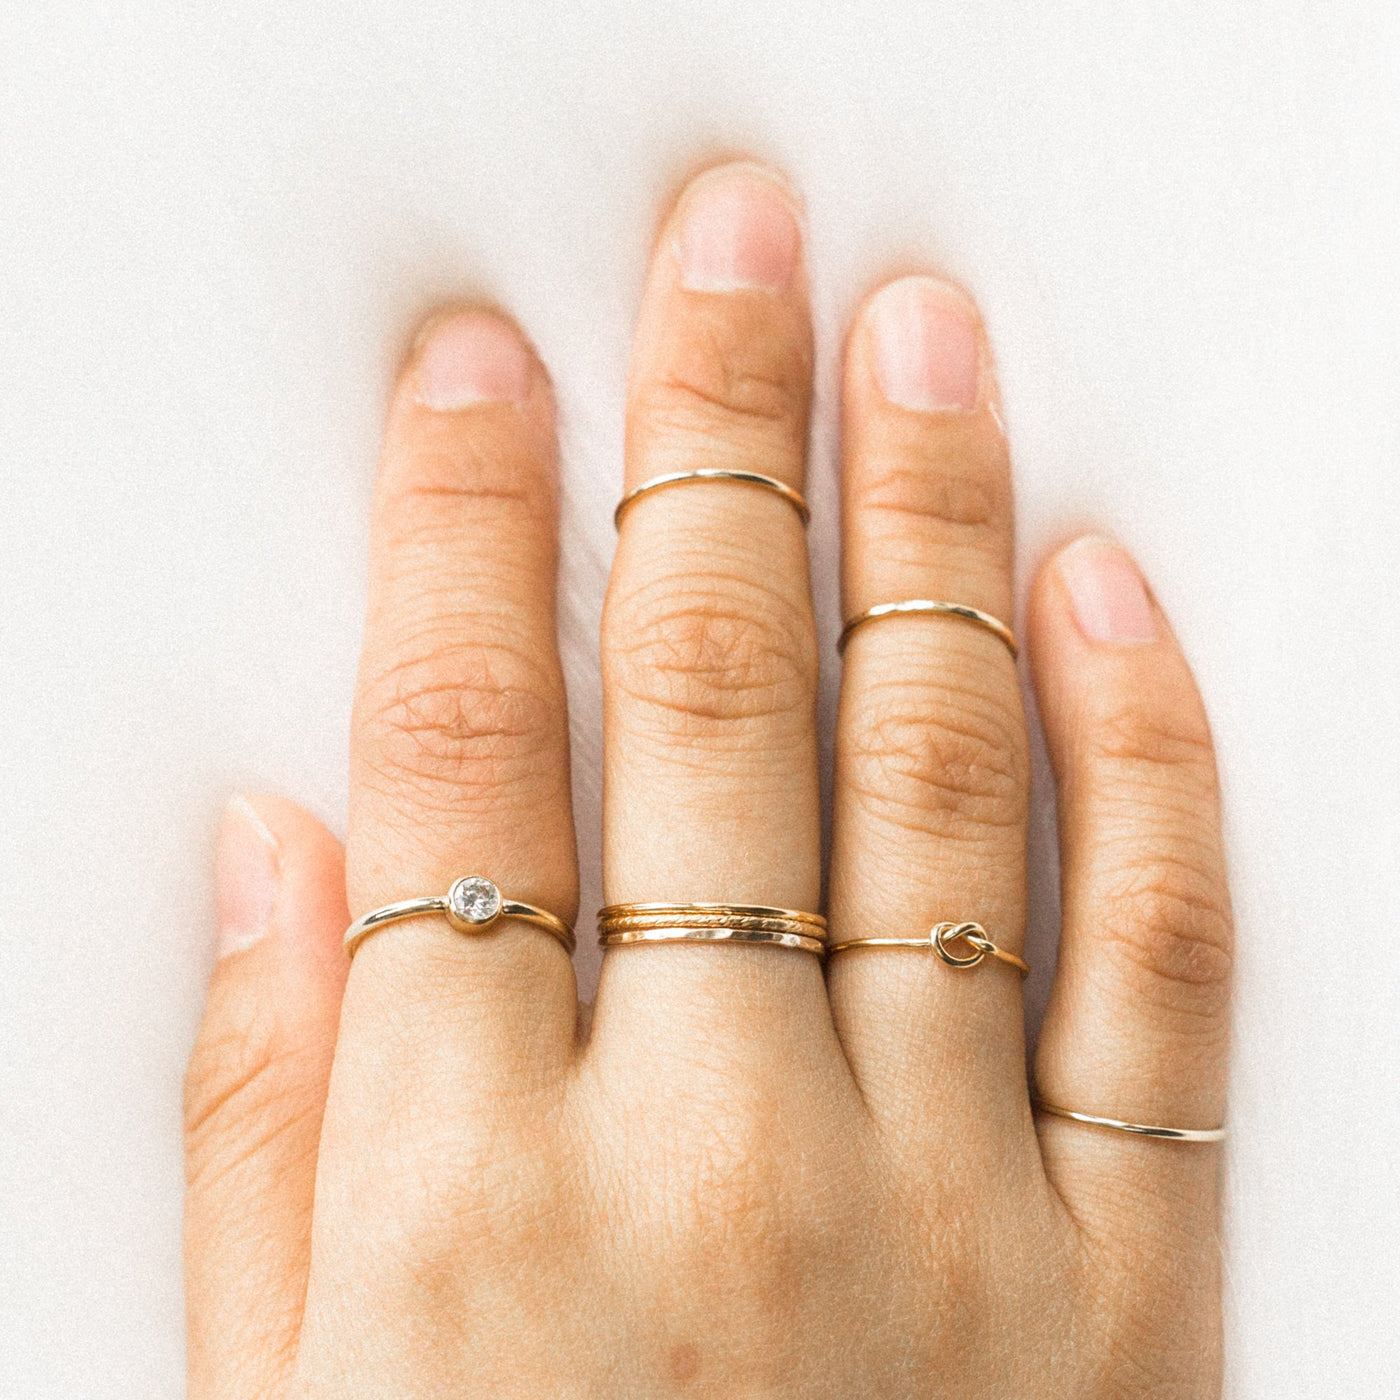 Solitaire Ring | Simple & Dainty Jewelry